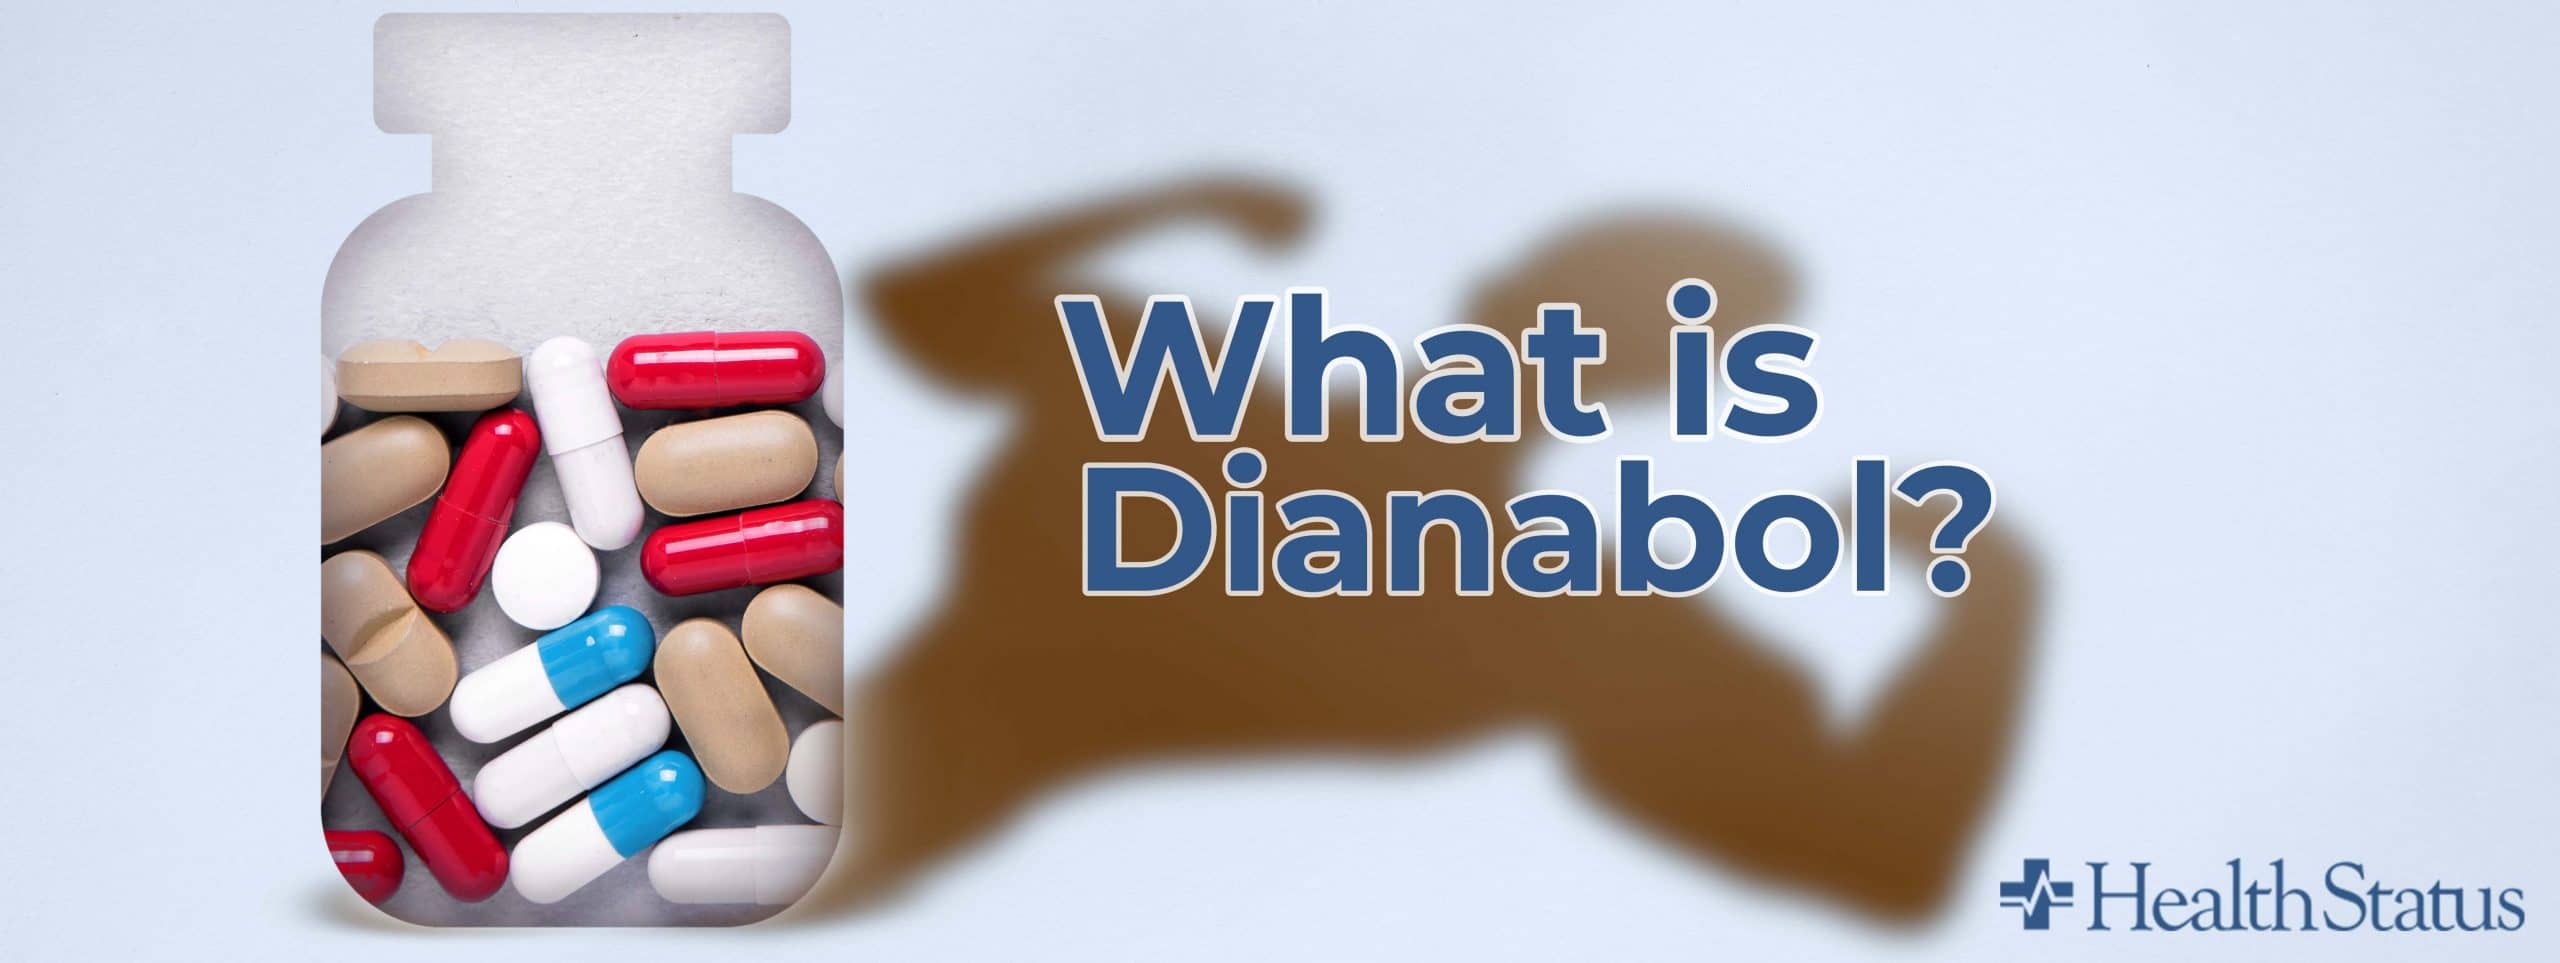 What is Dianabol